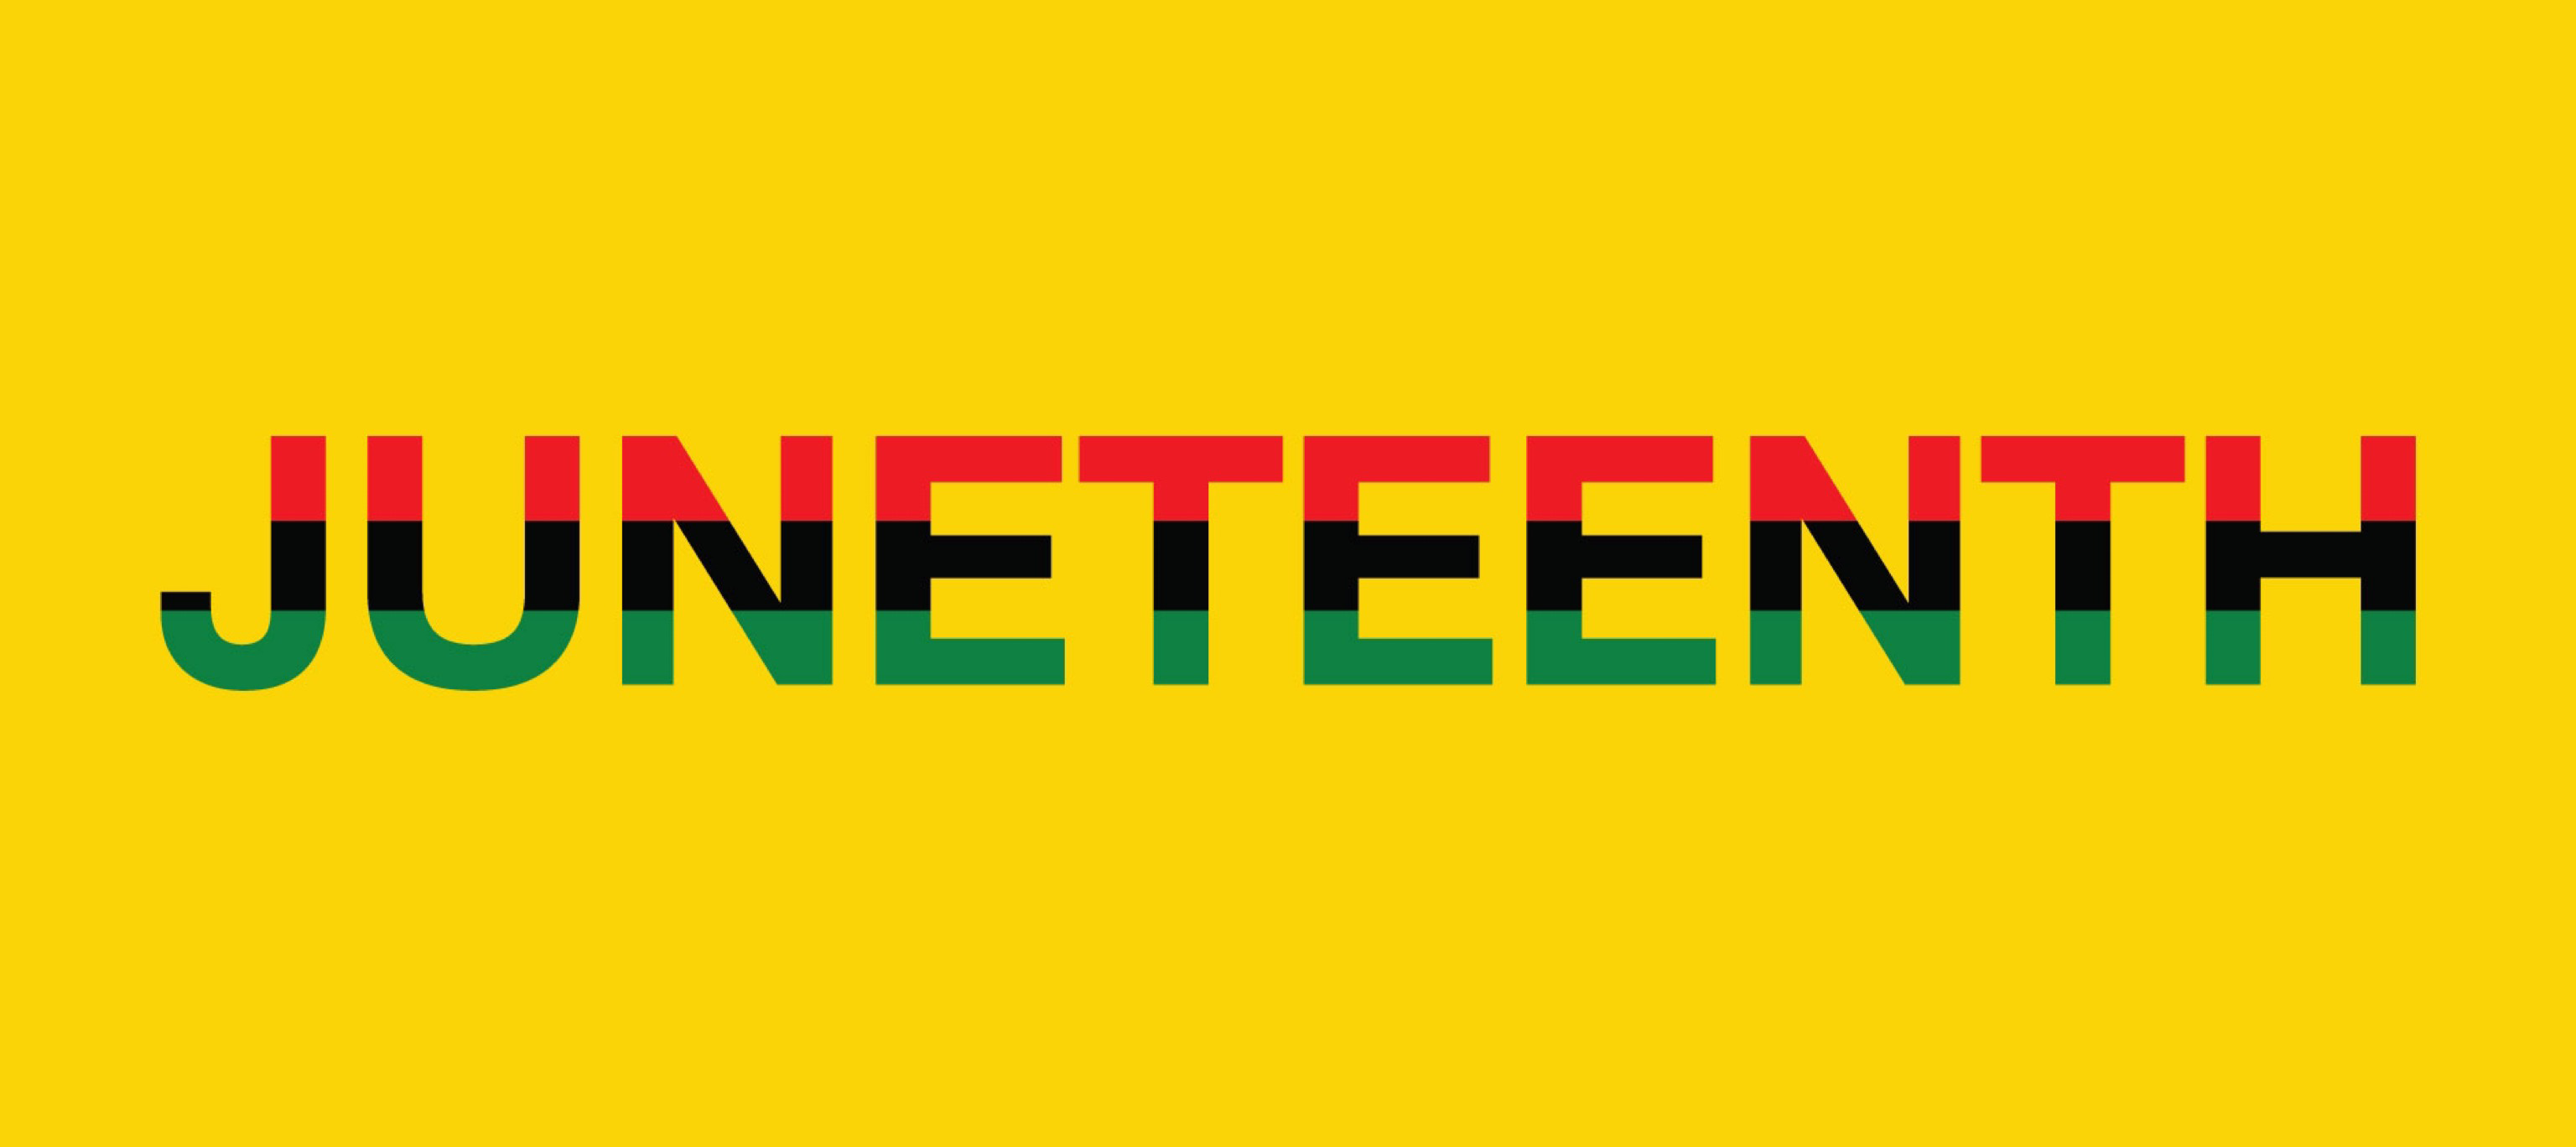 Juneteenth. Red, black and green type on a gold background